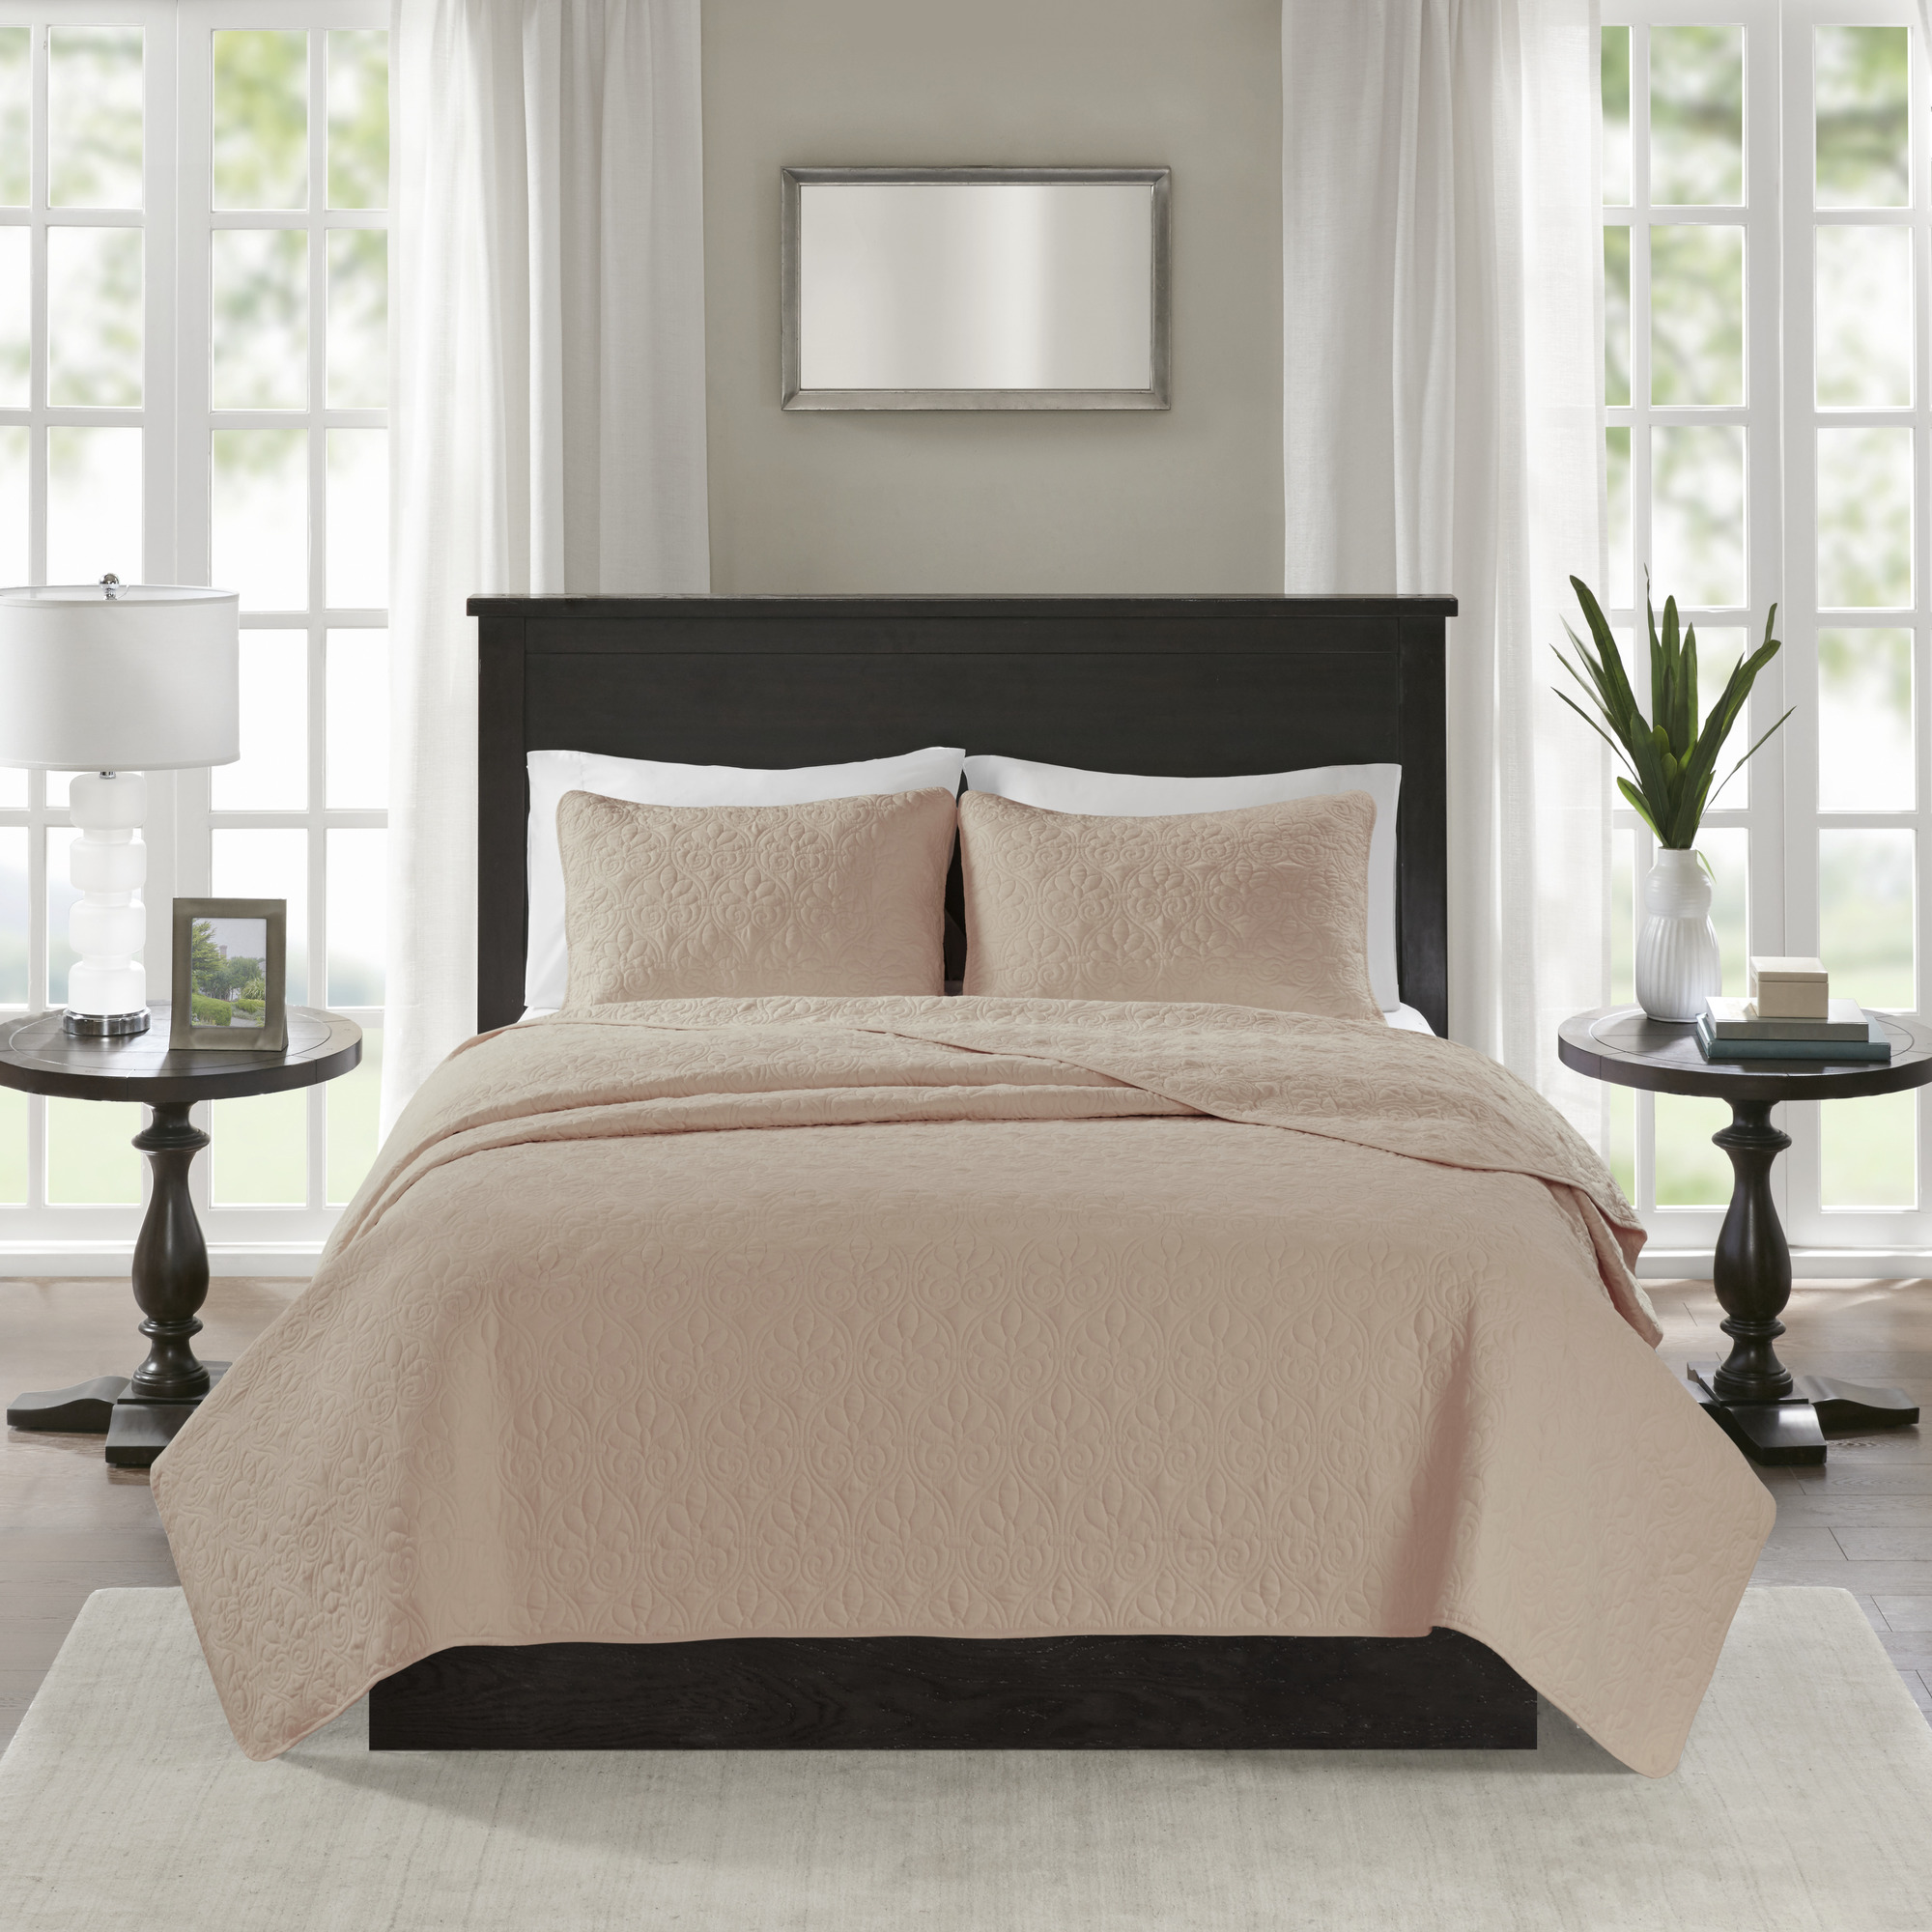 Home Essence Vancouver Super Soft Reversible Coverlet Set, Twin/Twin XL, Blush - image 5 of 13